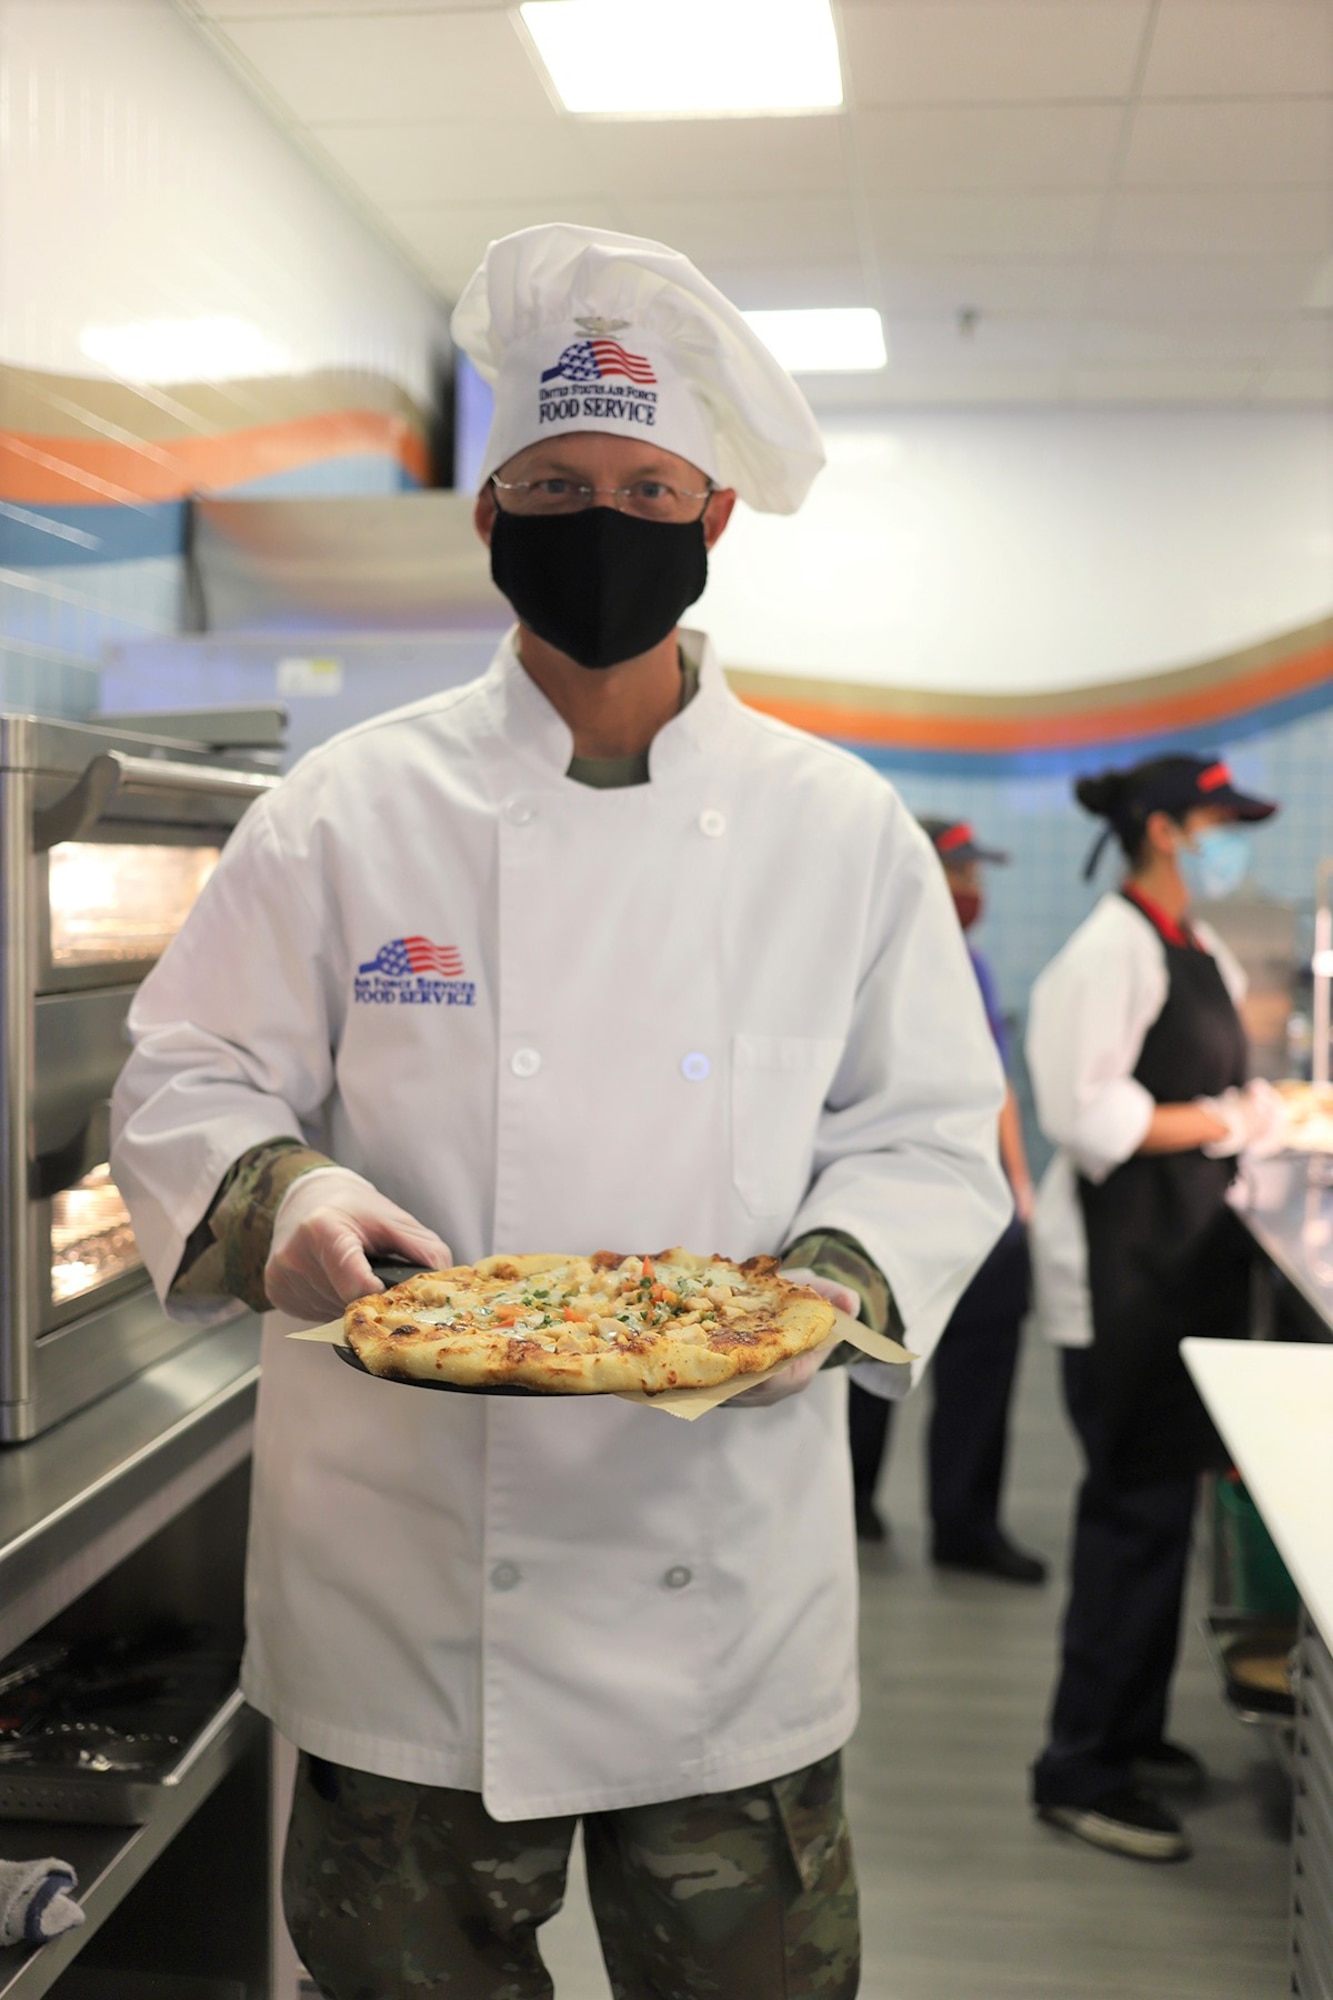 Col. David Rickards, 381st Training Group Commander, is ready to put a freshly cooked pizza on a serving station in the newly reopened The Beachcombers dining facility at Vandenberg AFB, California, Aug. 6, 2020.